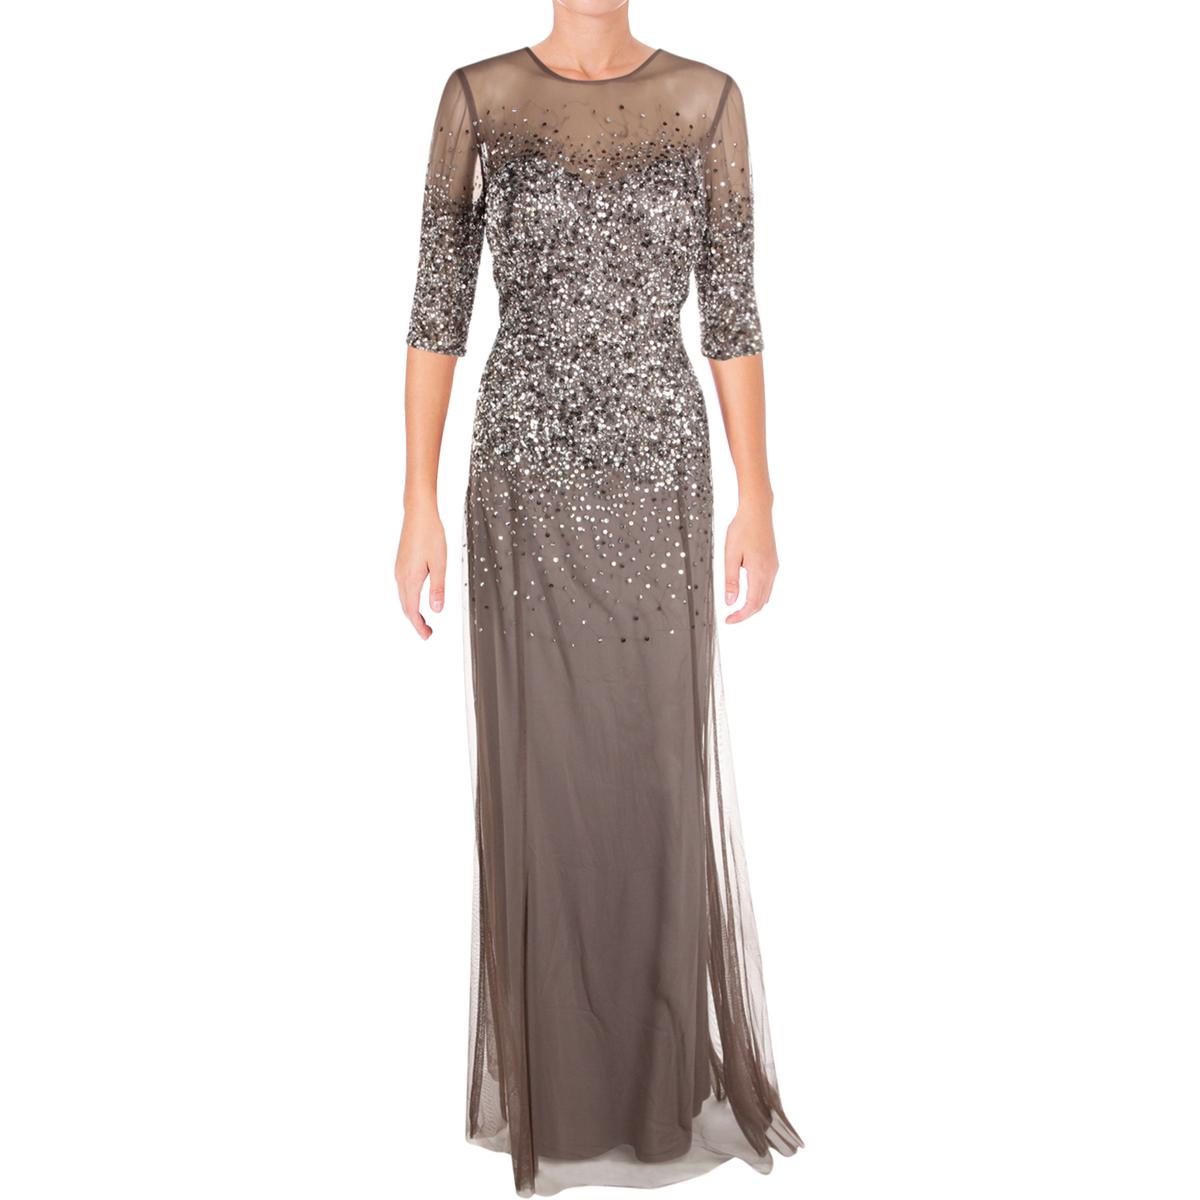 Adrianna Papell Womens Gray Sequined Full-Length Evening Dress Gown 4